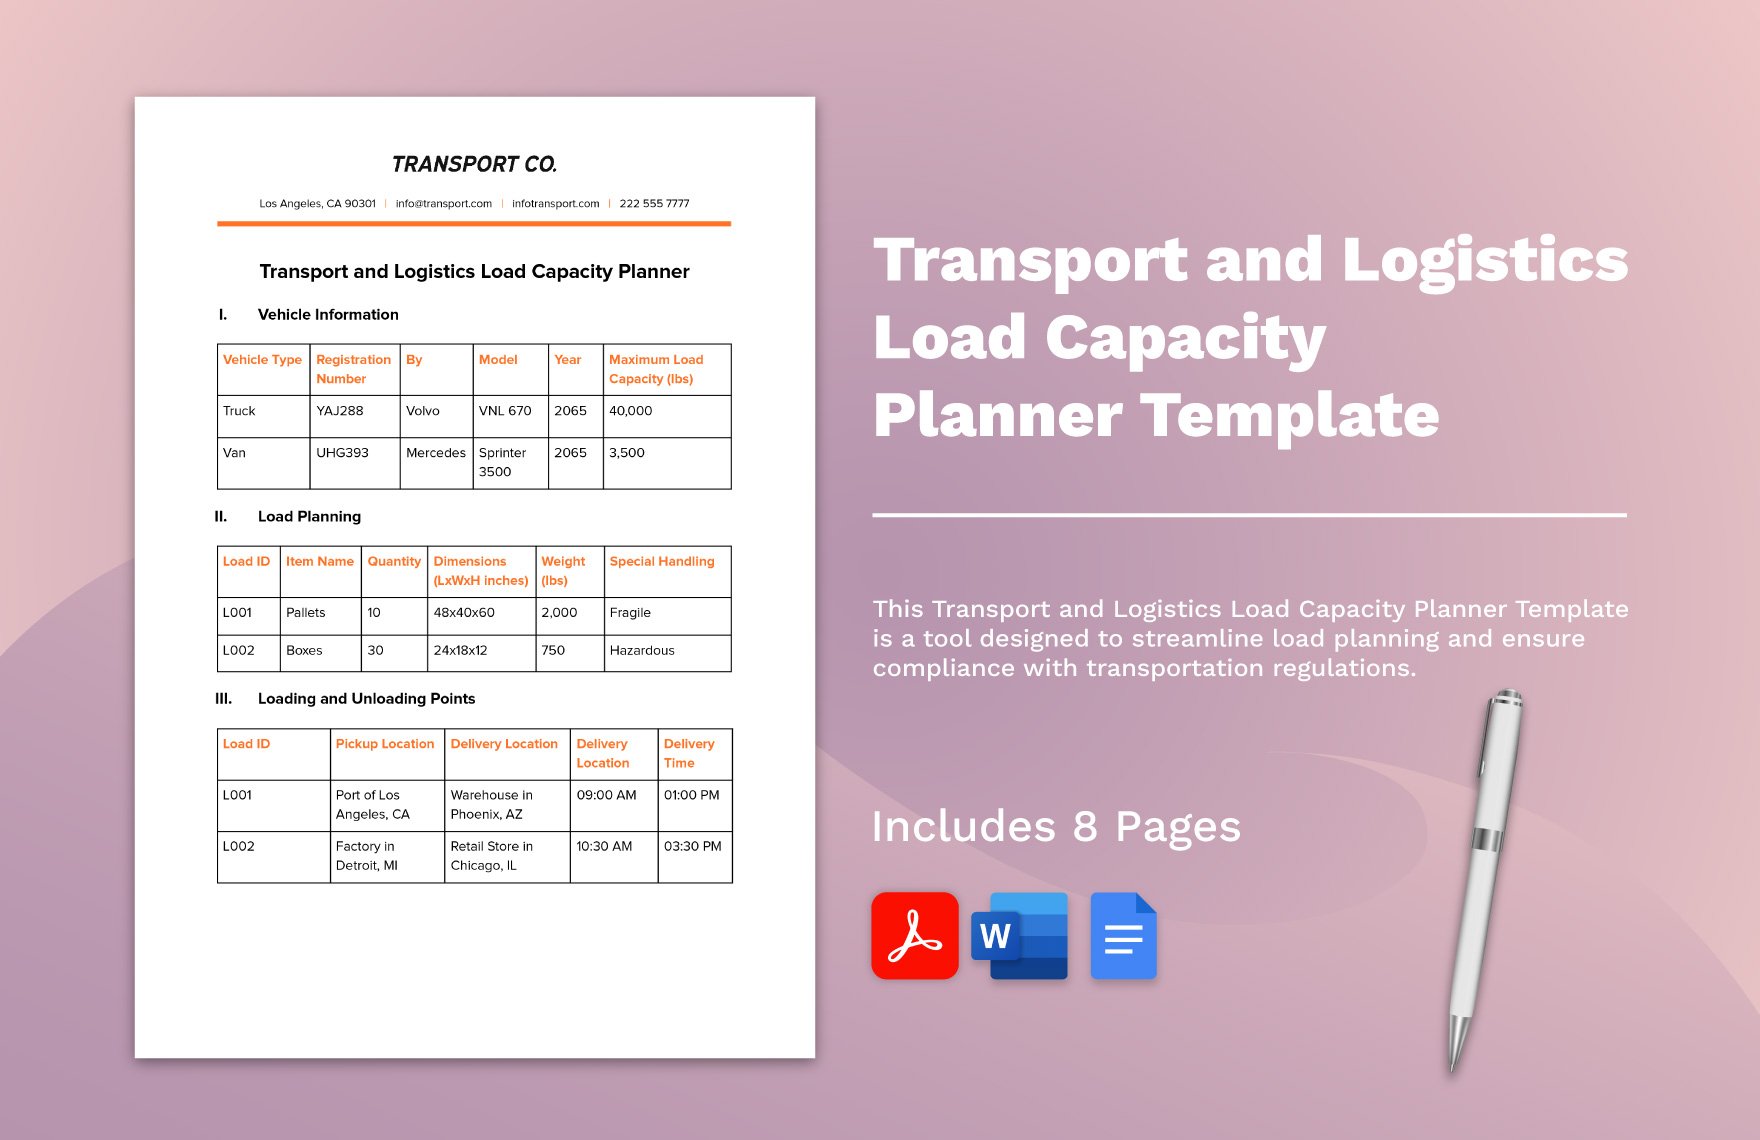 Transport and Logistics Load Capacity Planner Template